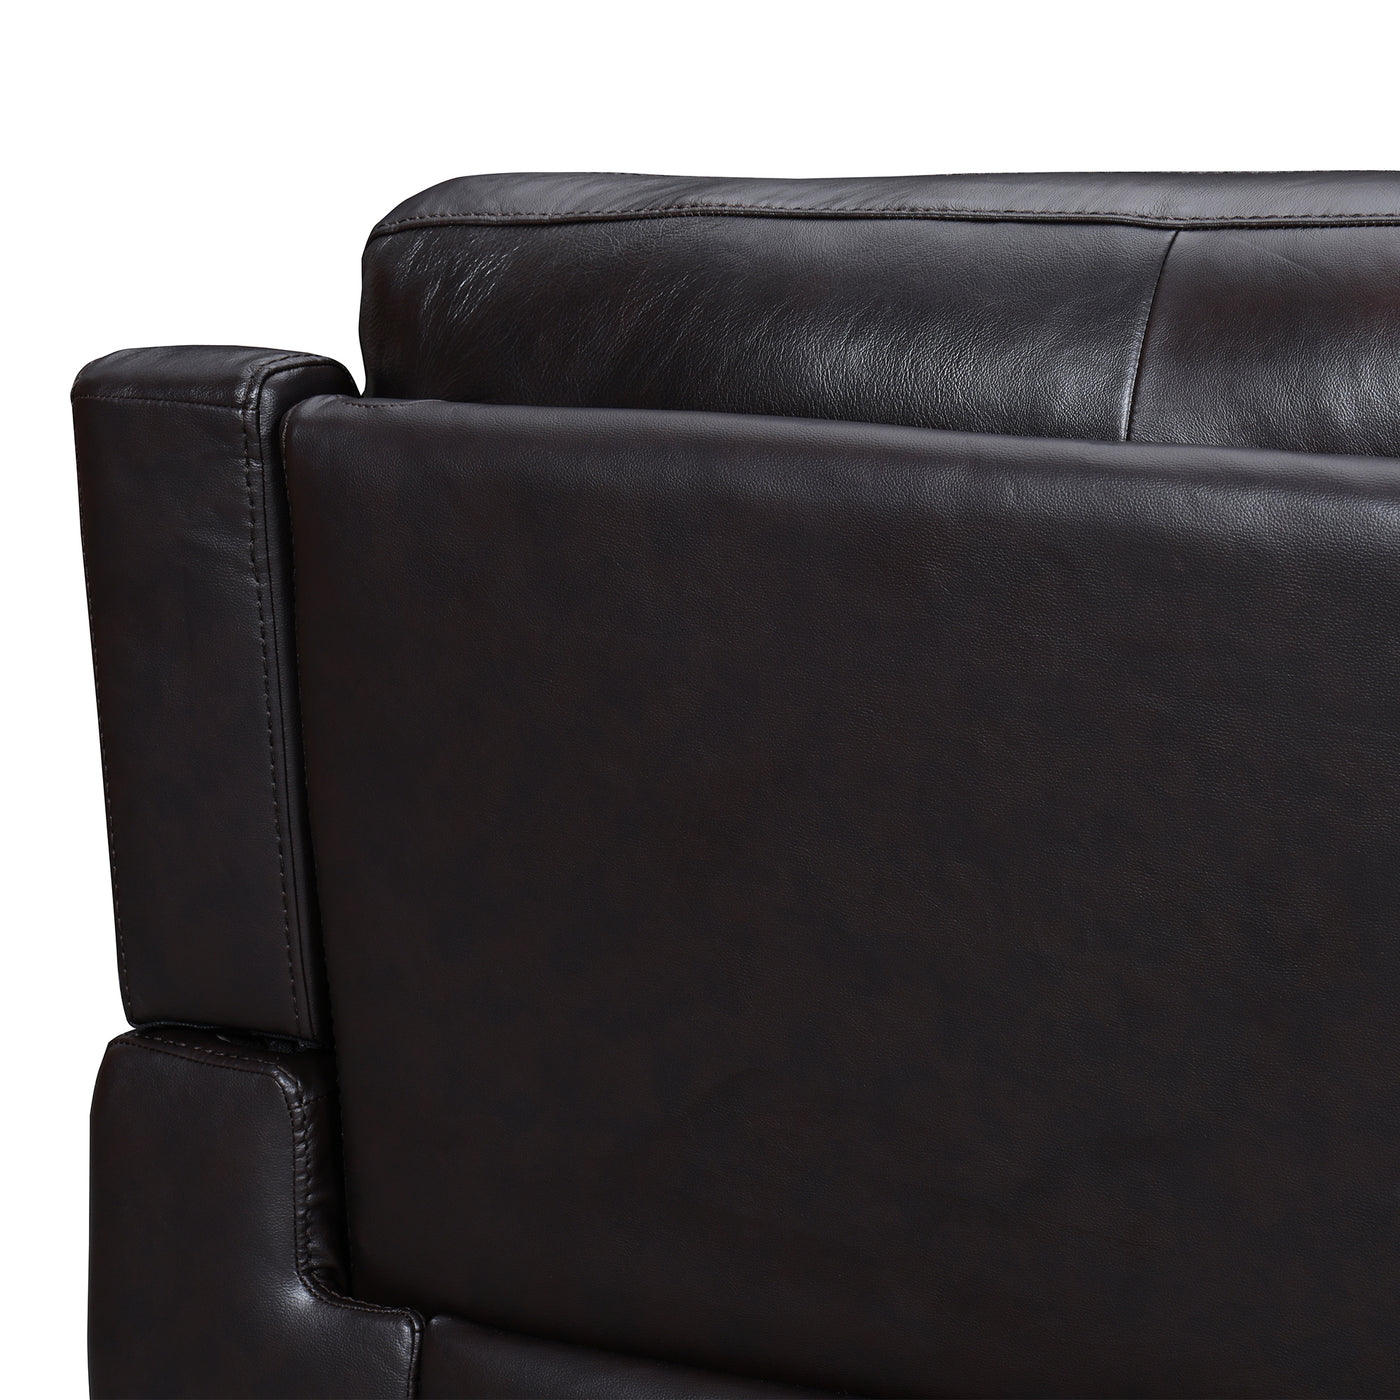 Lizette Leather Power Recliner Sofa with USB